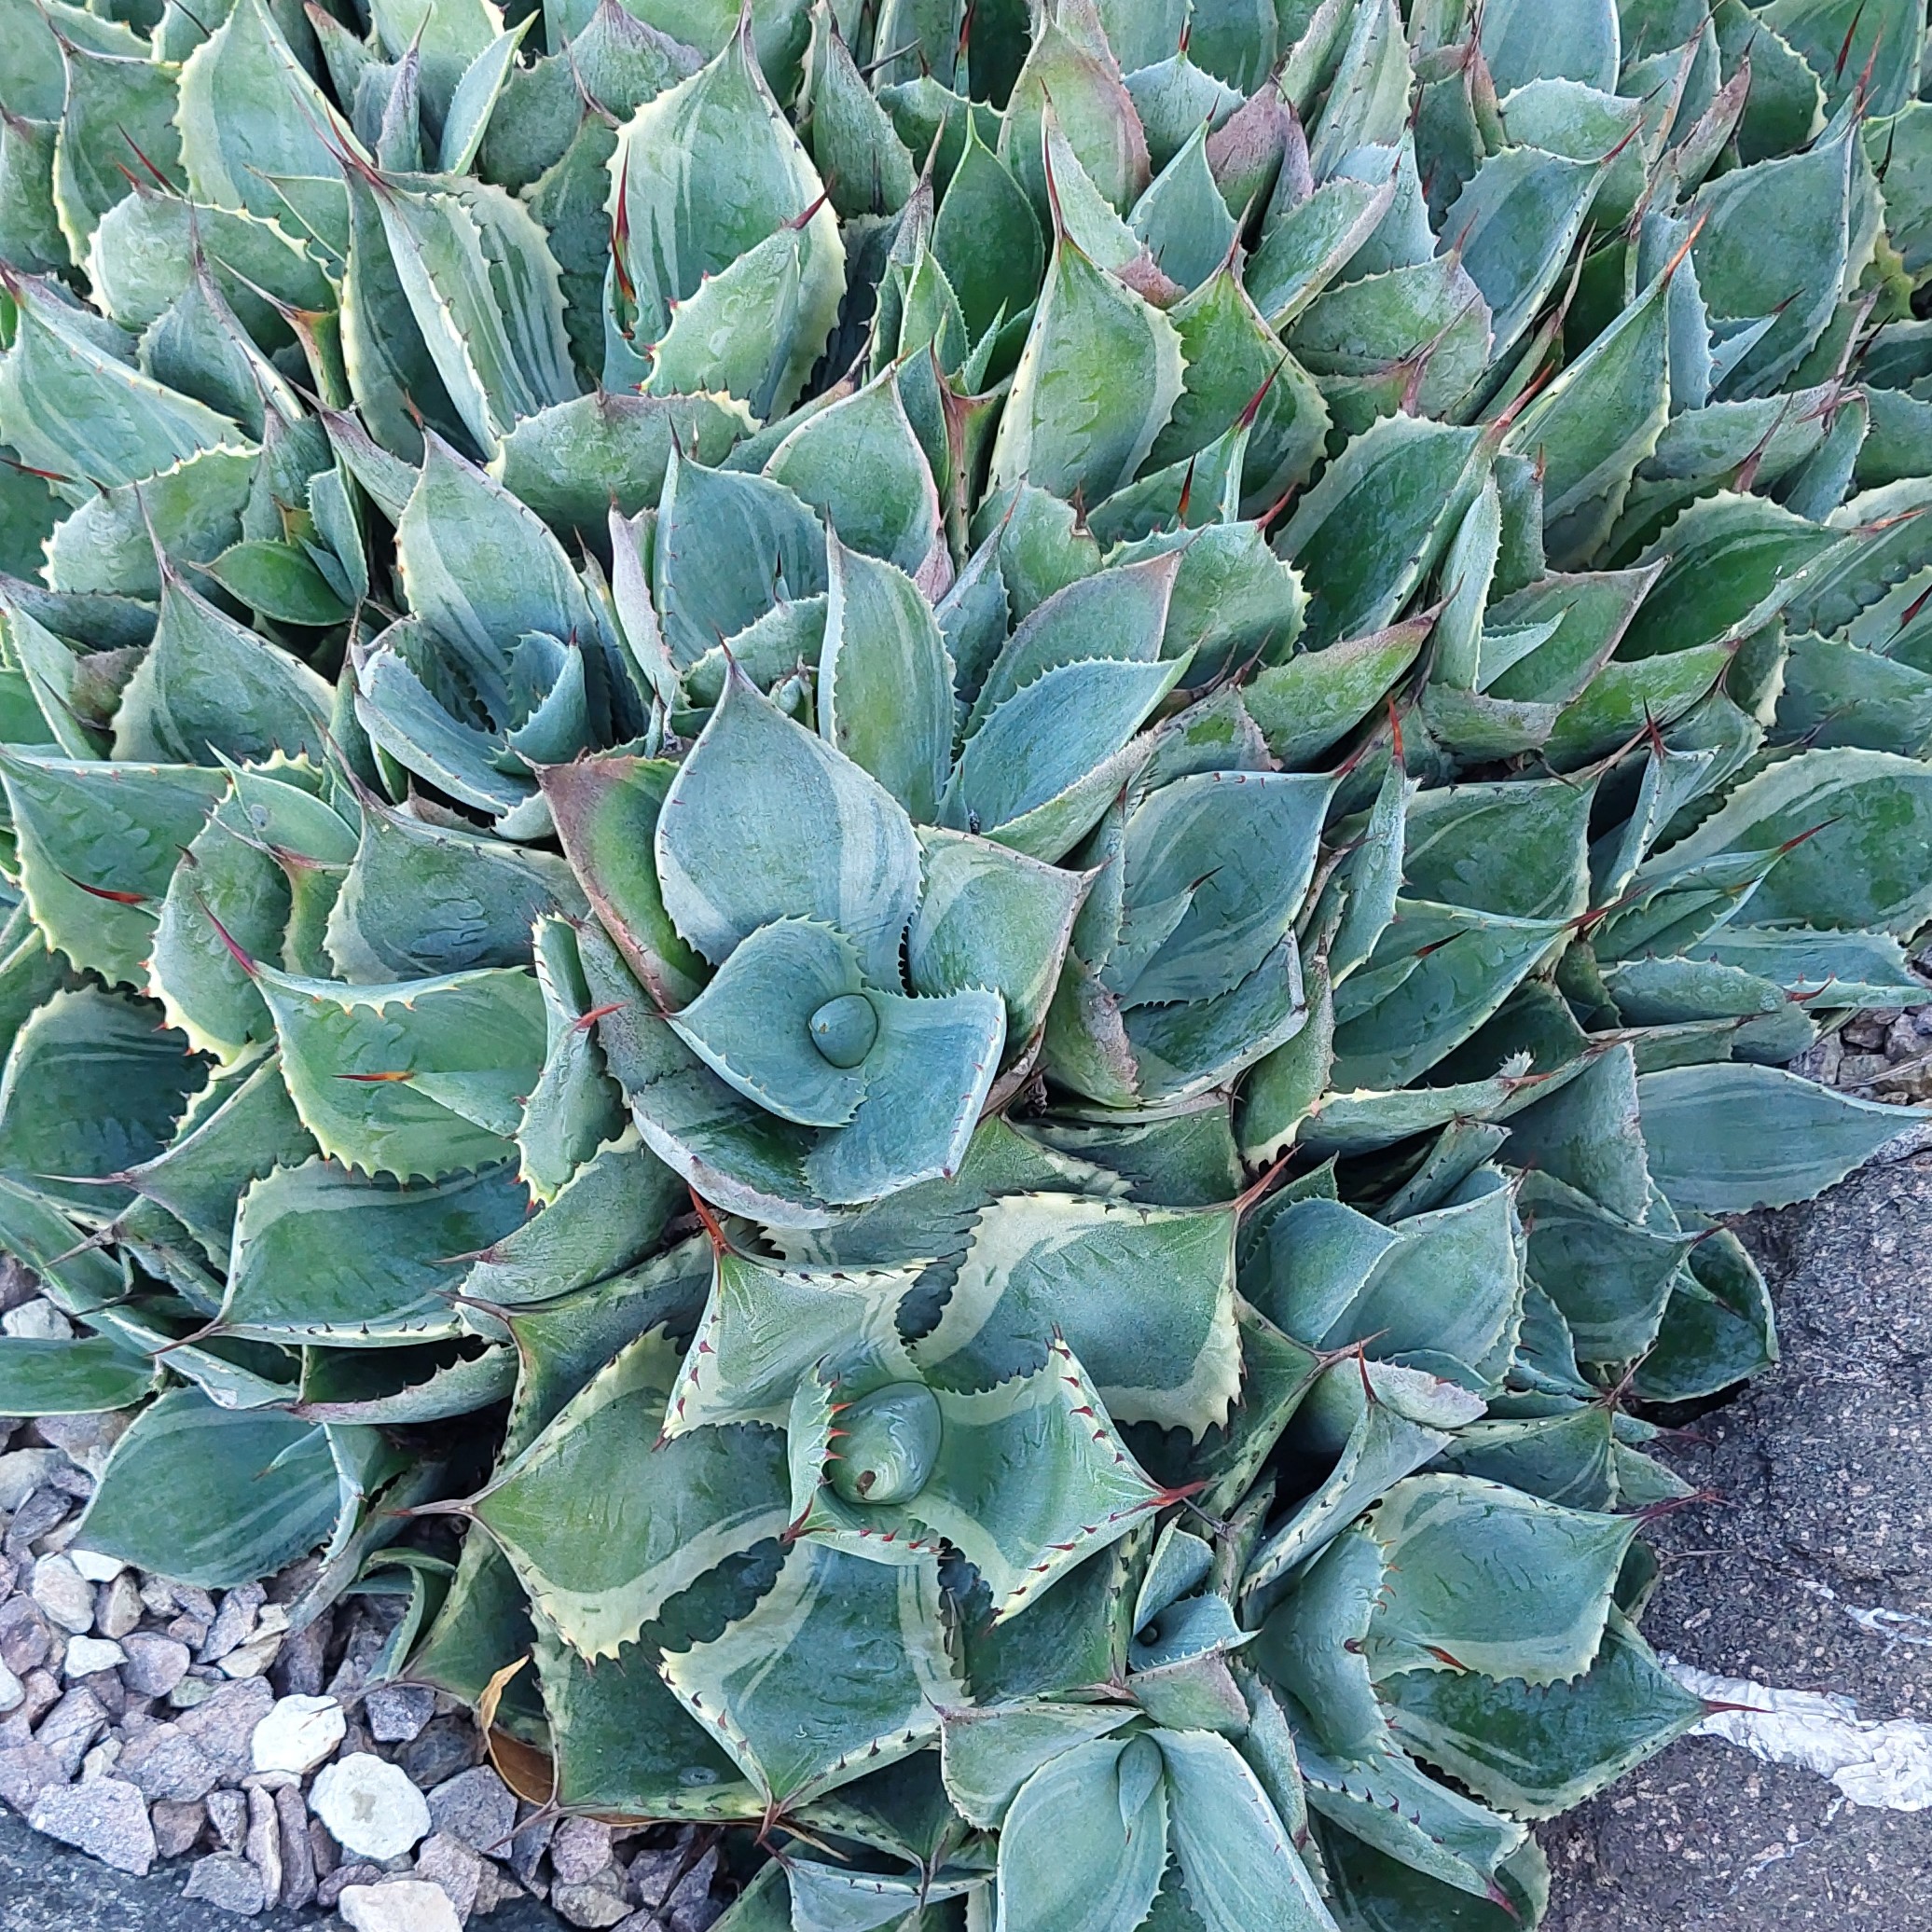 Agave trade winds